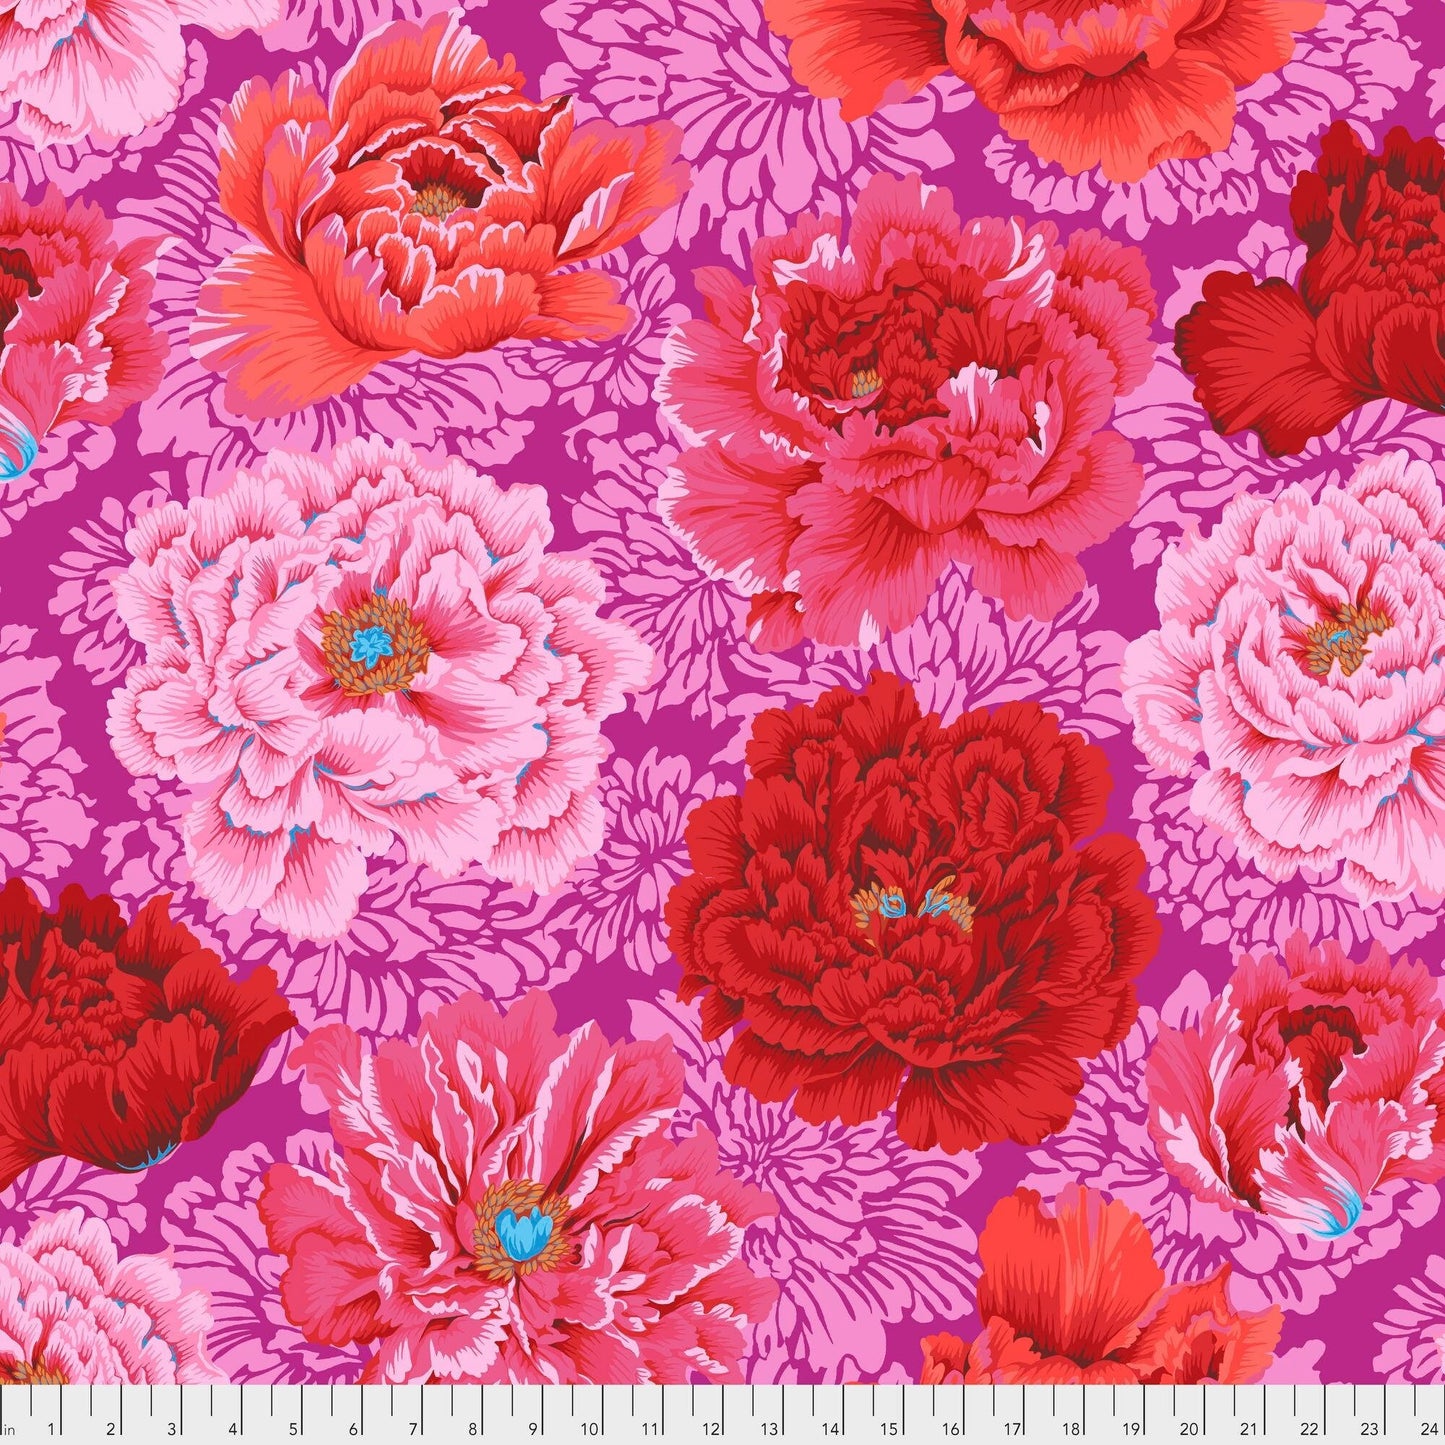 Kaffe Fassett Brocade Peony Hot PWPJ062 Philip Jacobs, Free Spirit Fabric, Quilt Fabric, Cotton Fabric, Quilting, Fabric By The Yard